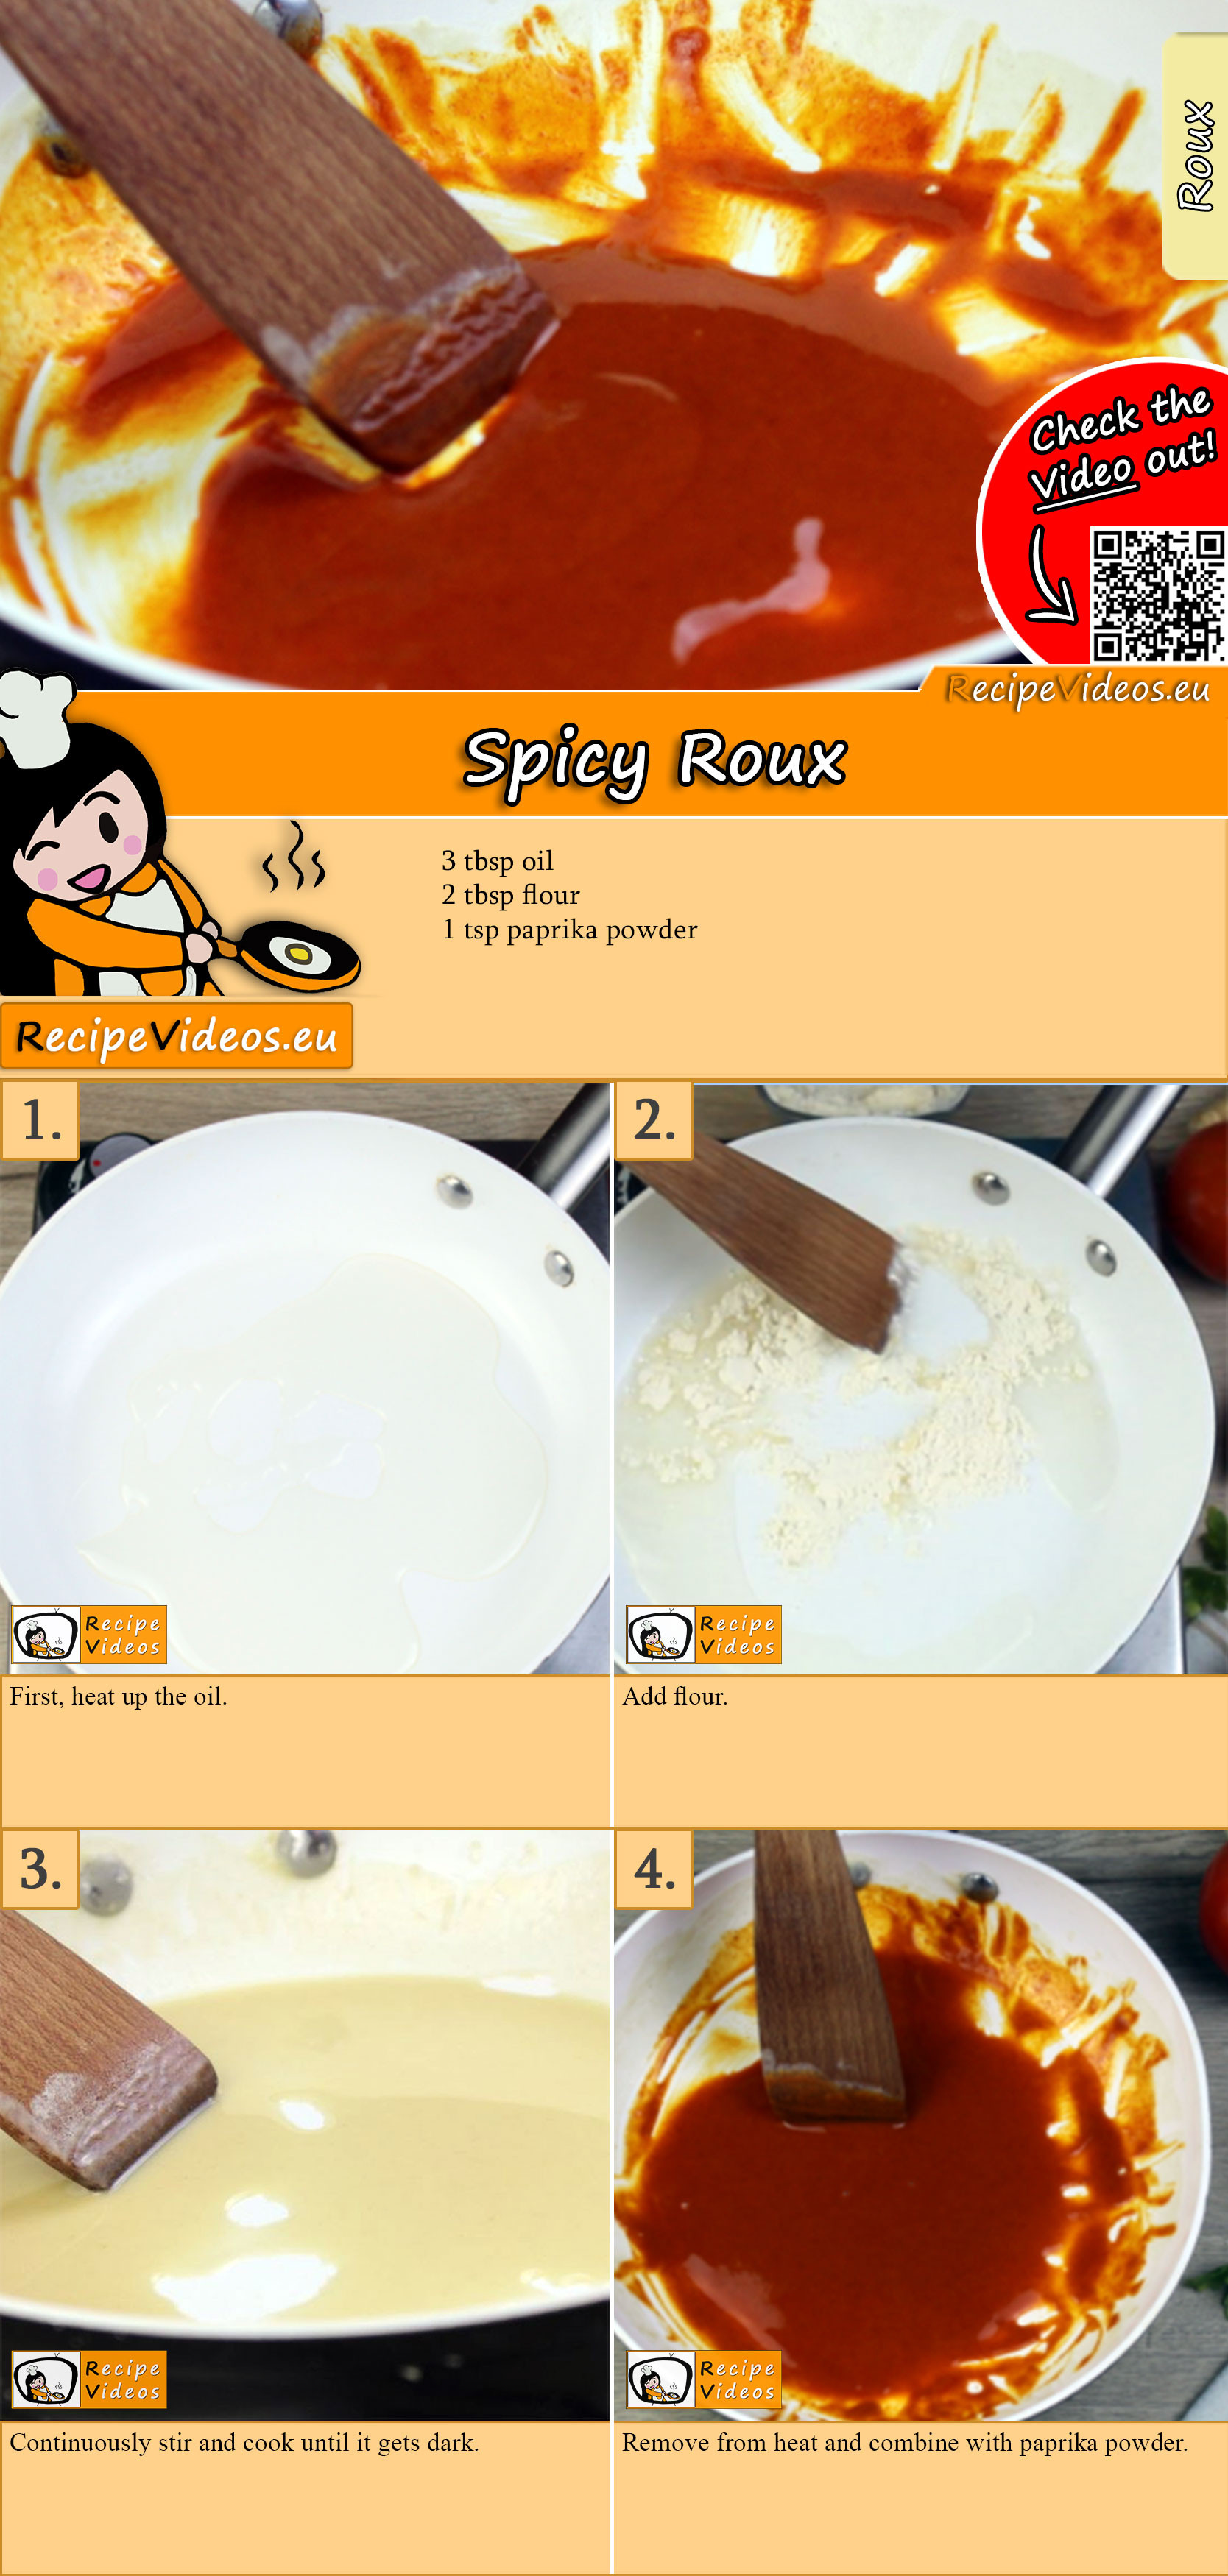 Spicy Roux recipe with video